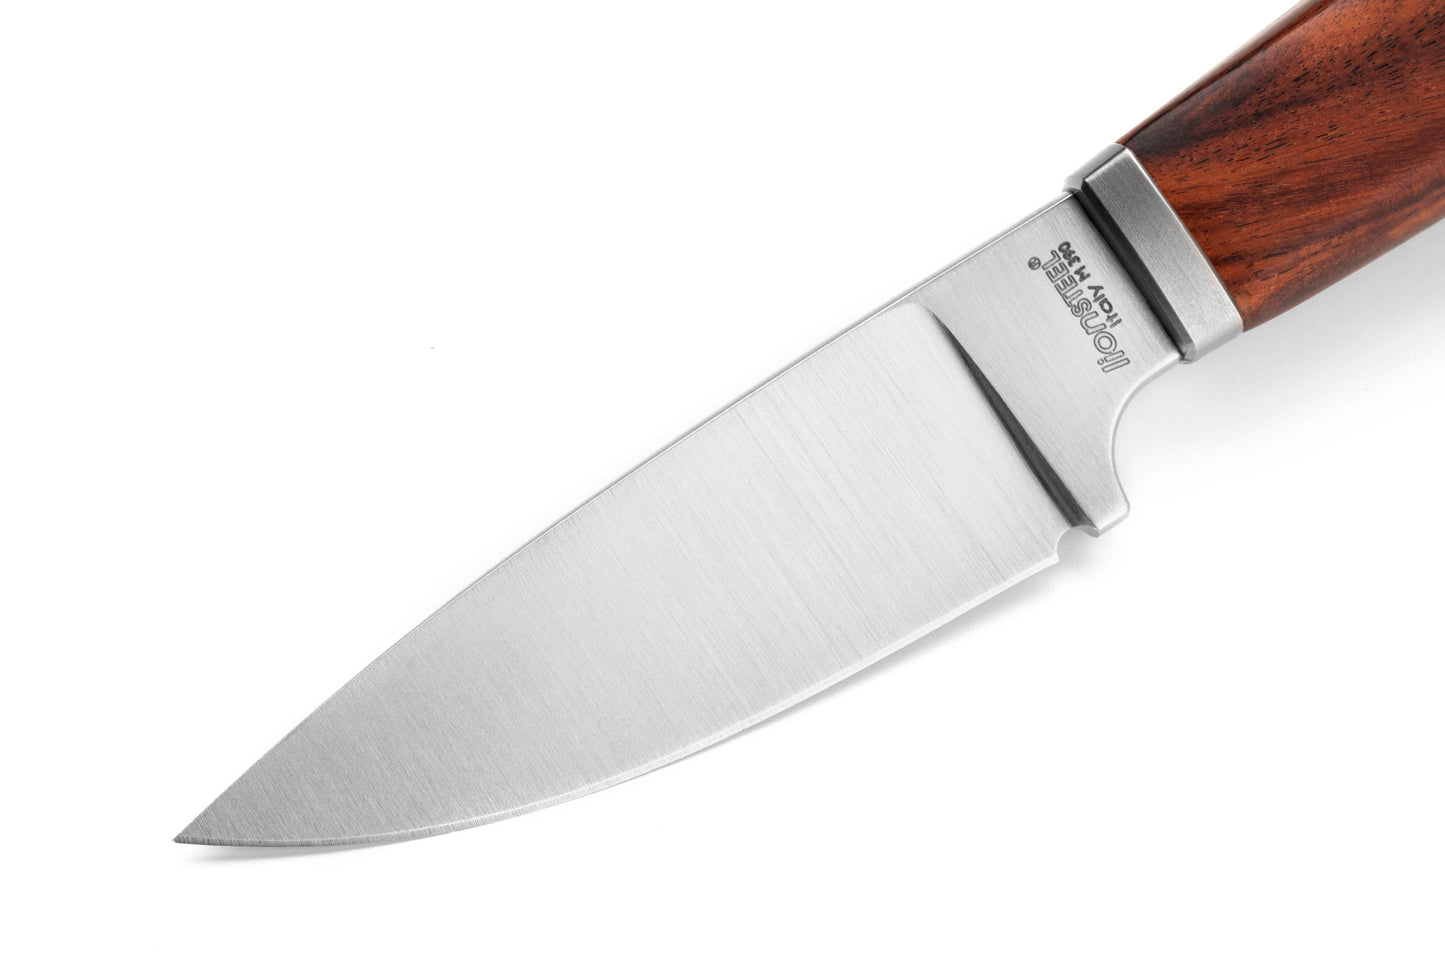 LionSteel Willy 2.56" M390 Santos Wood Fixed Blade Knife with Leather Sheath WL1 ST